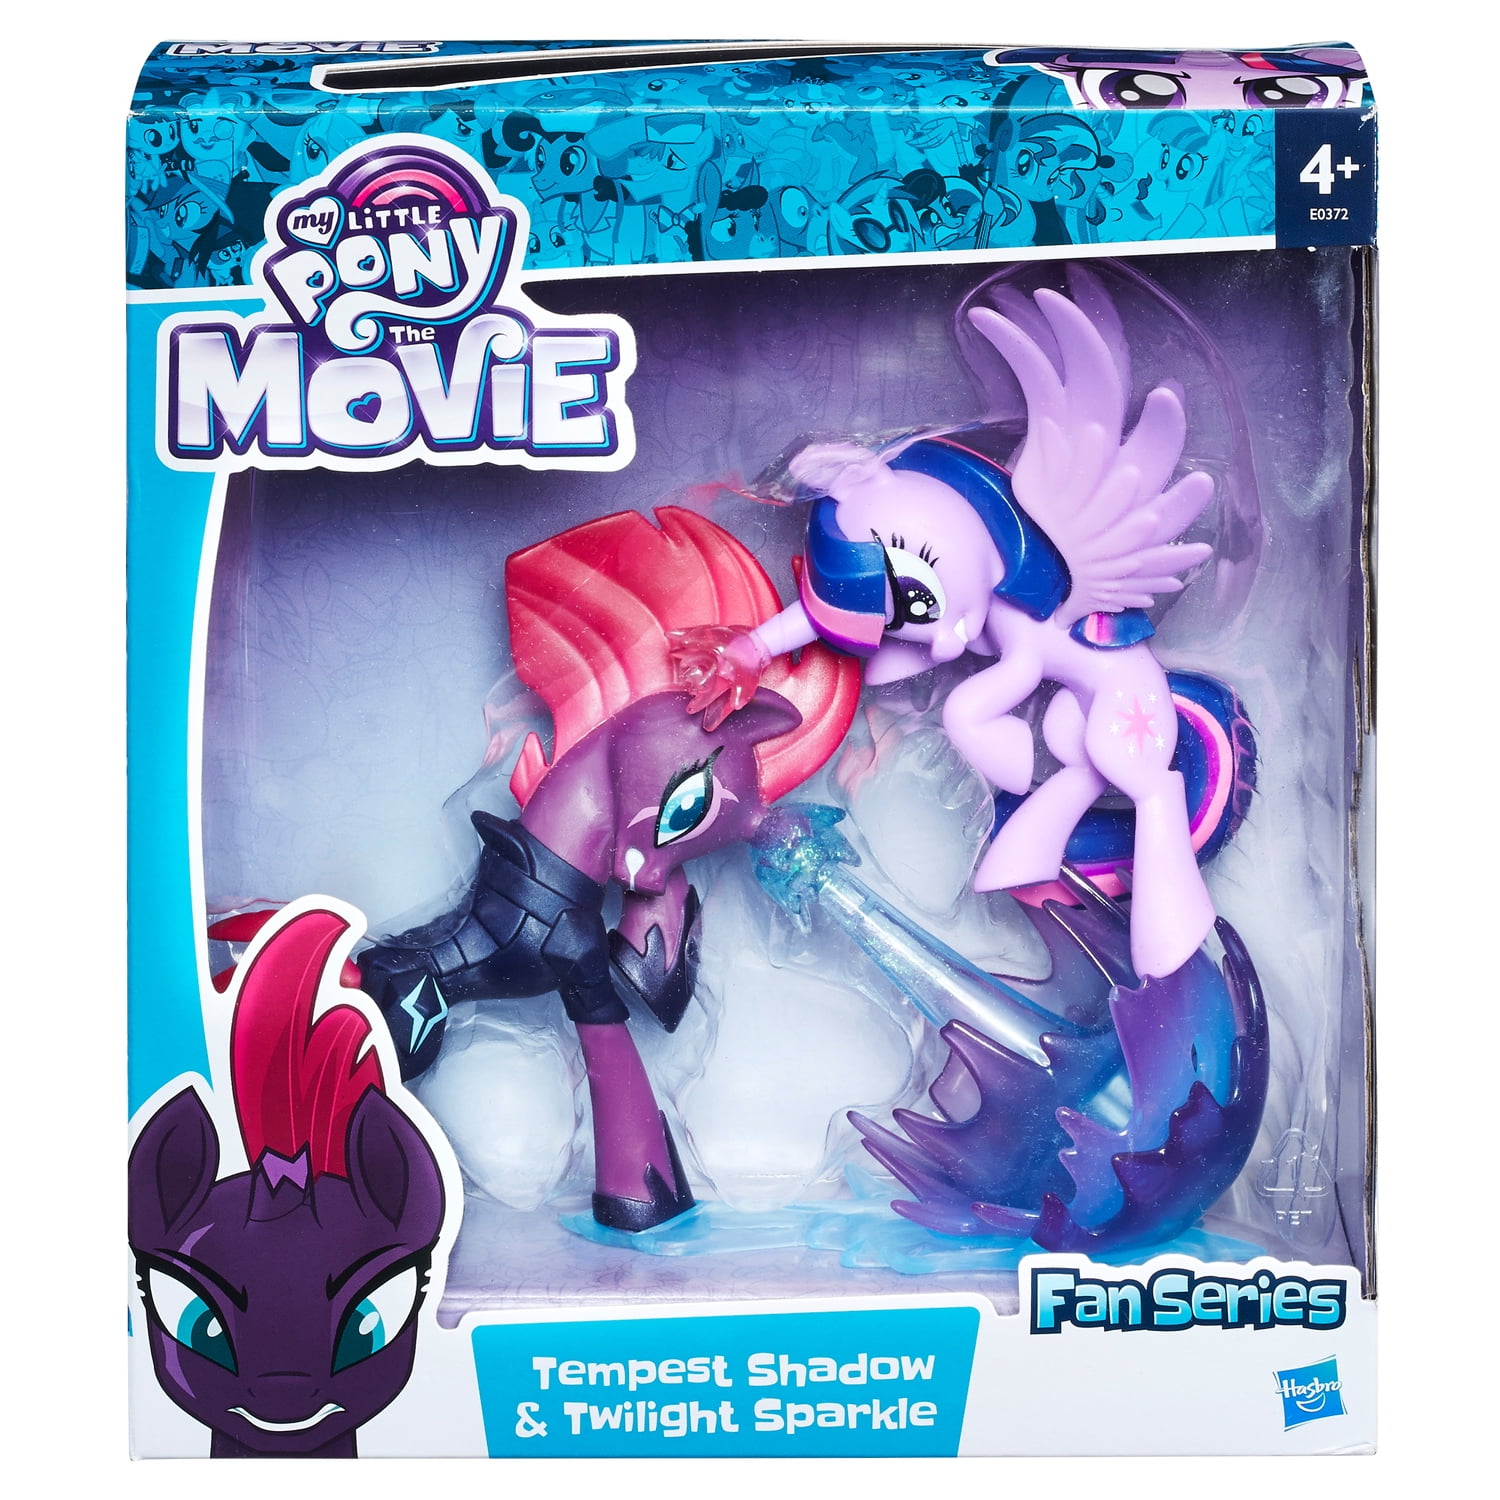 My Little Pony The Movie Fan Series Tempest Shadow Twilight Sparkle Walmart Com Walmart Com The movie is a 2017 animated musical fantasy film based on the television series my little pony: my little pony the movie fan series tempest shadow twilight sparkle